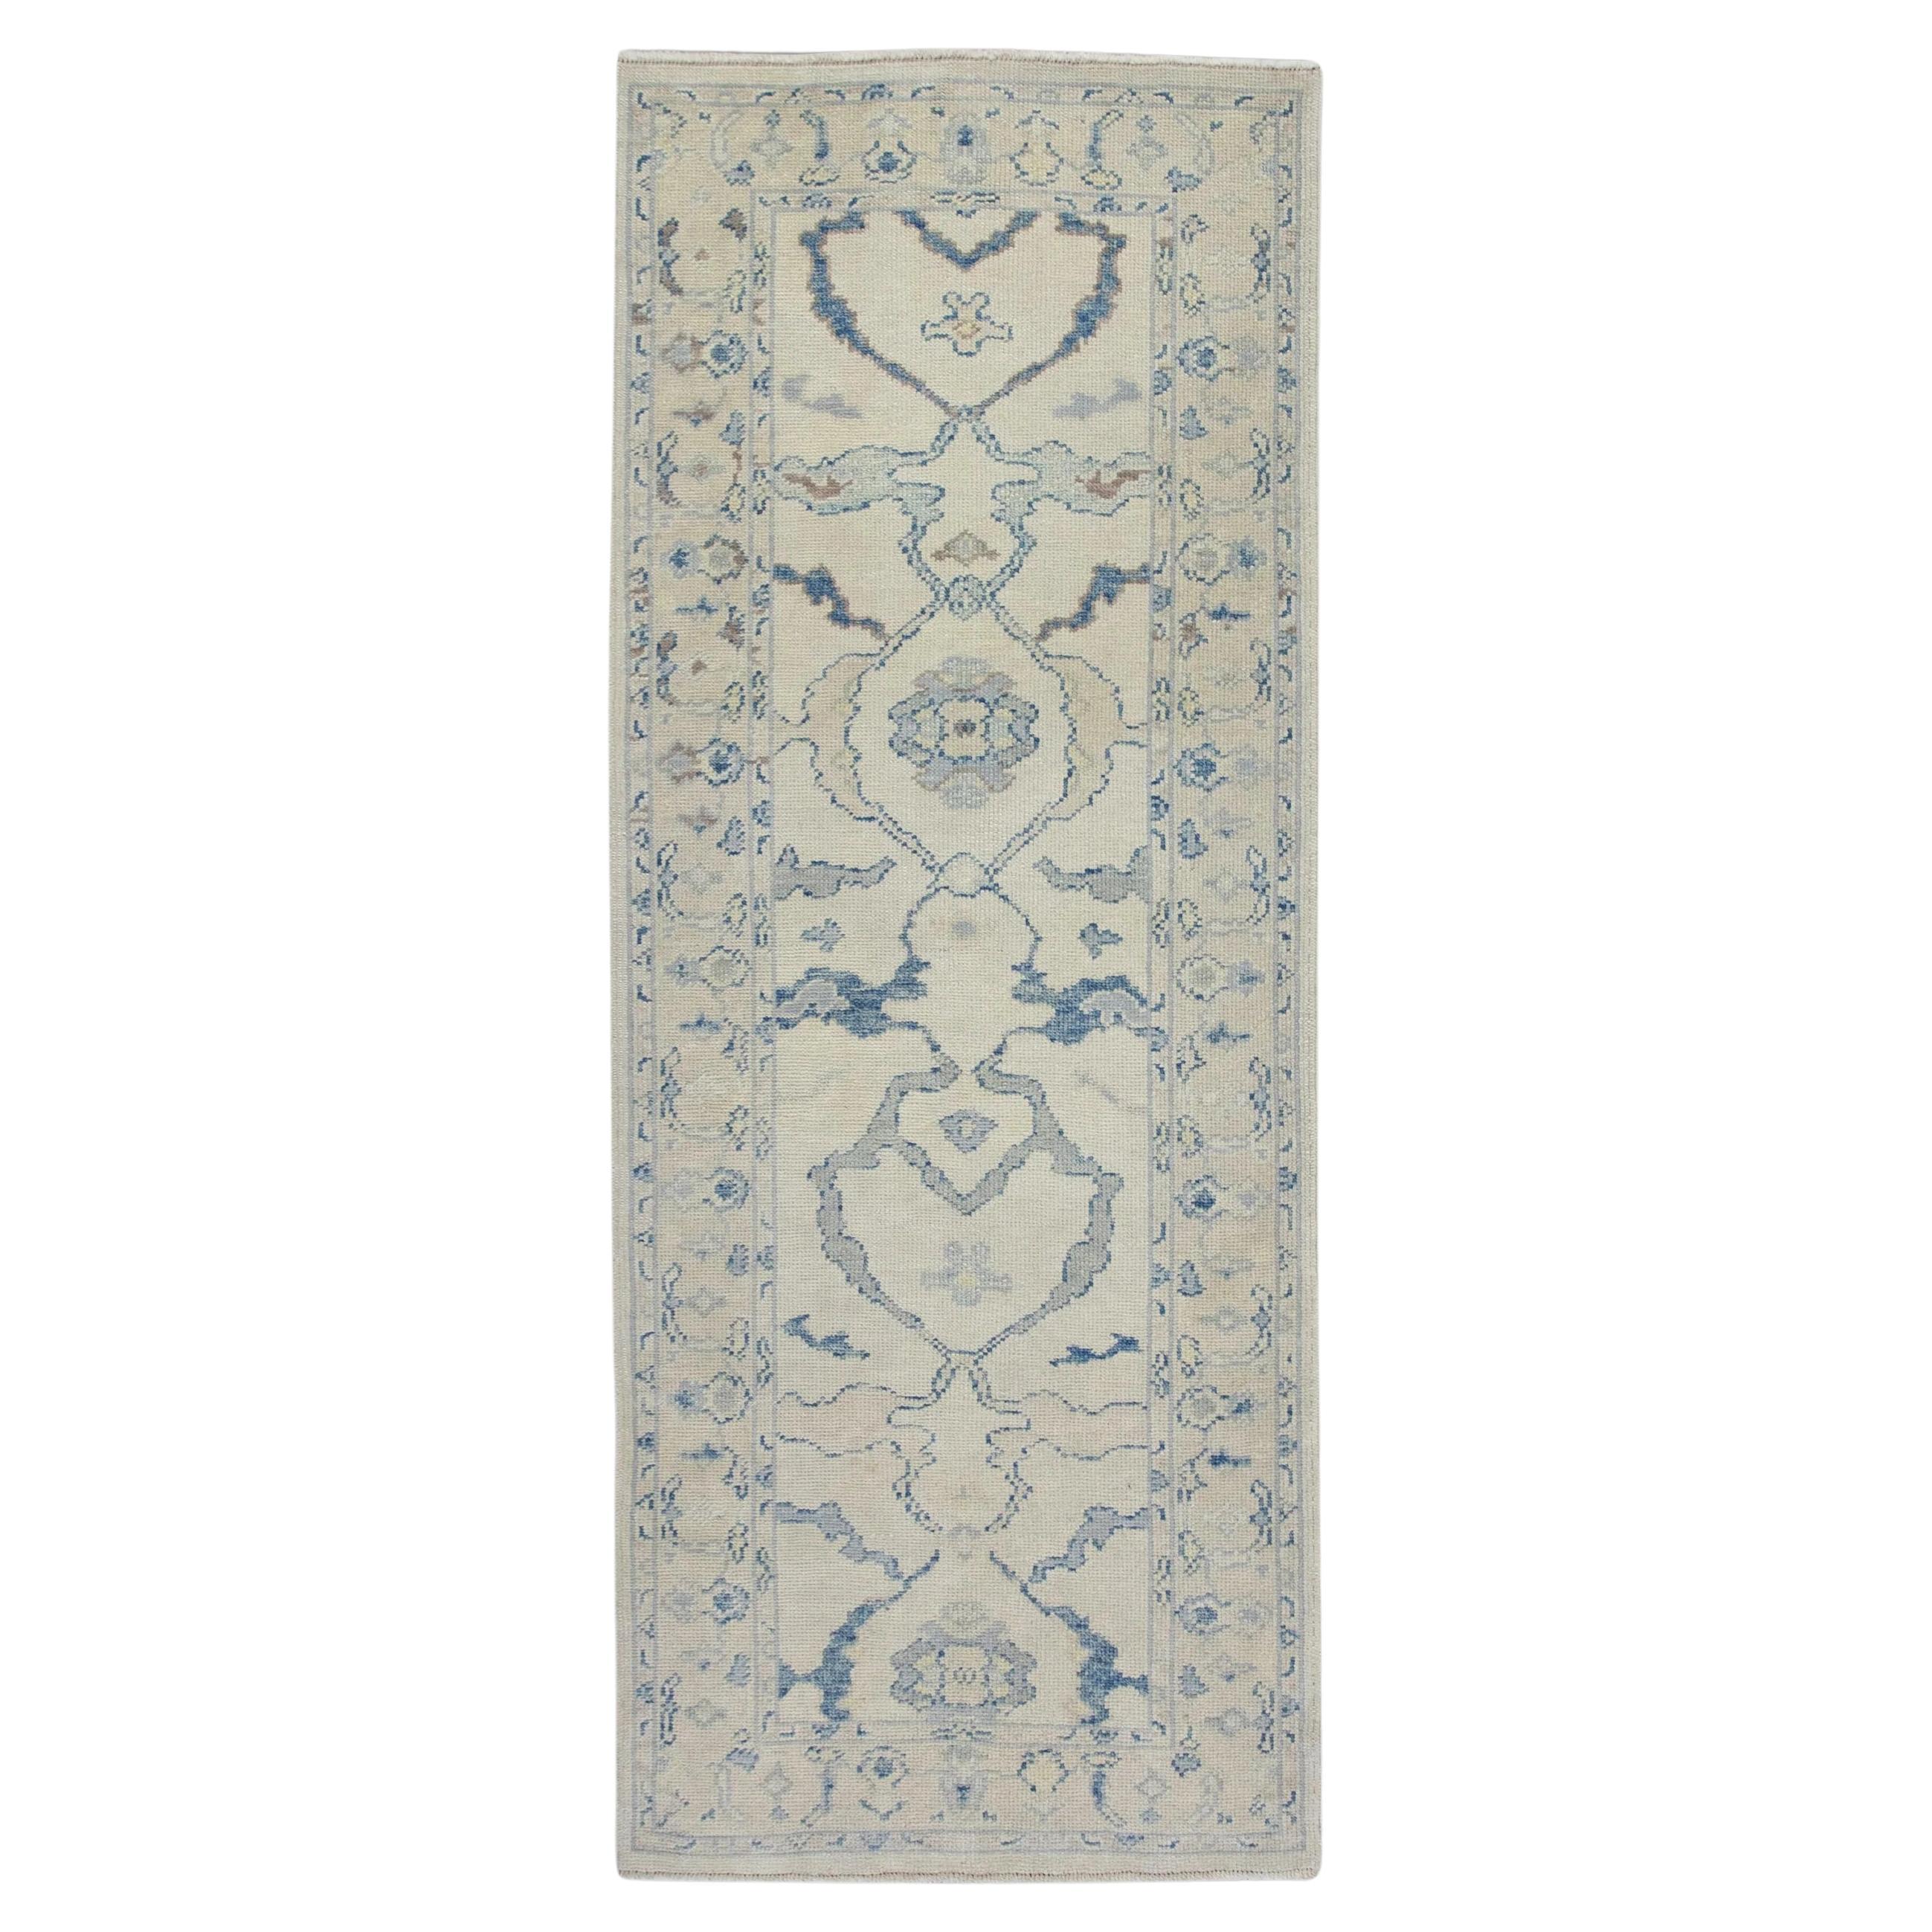 Cream and Blue Floral Handwoven Wool Turkish Oushak Rug 3'1" x 7'4"